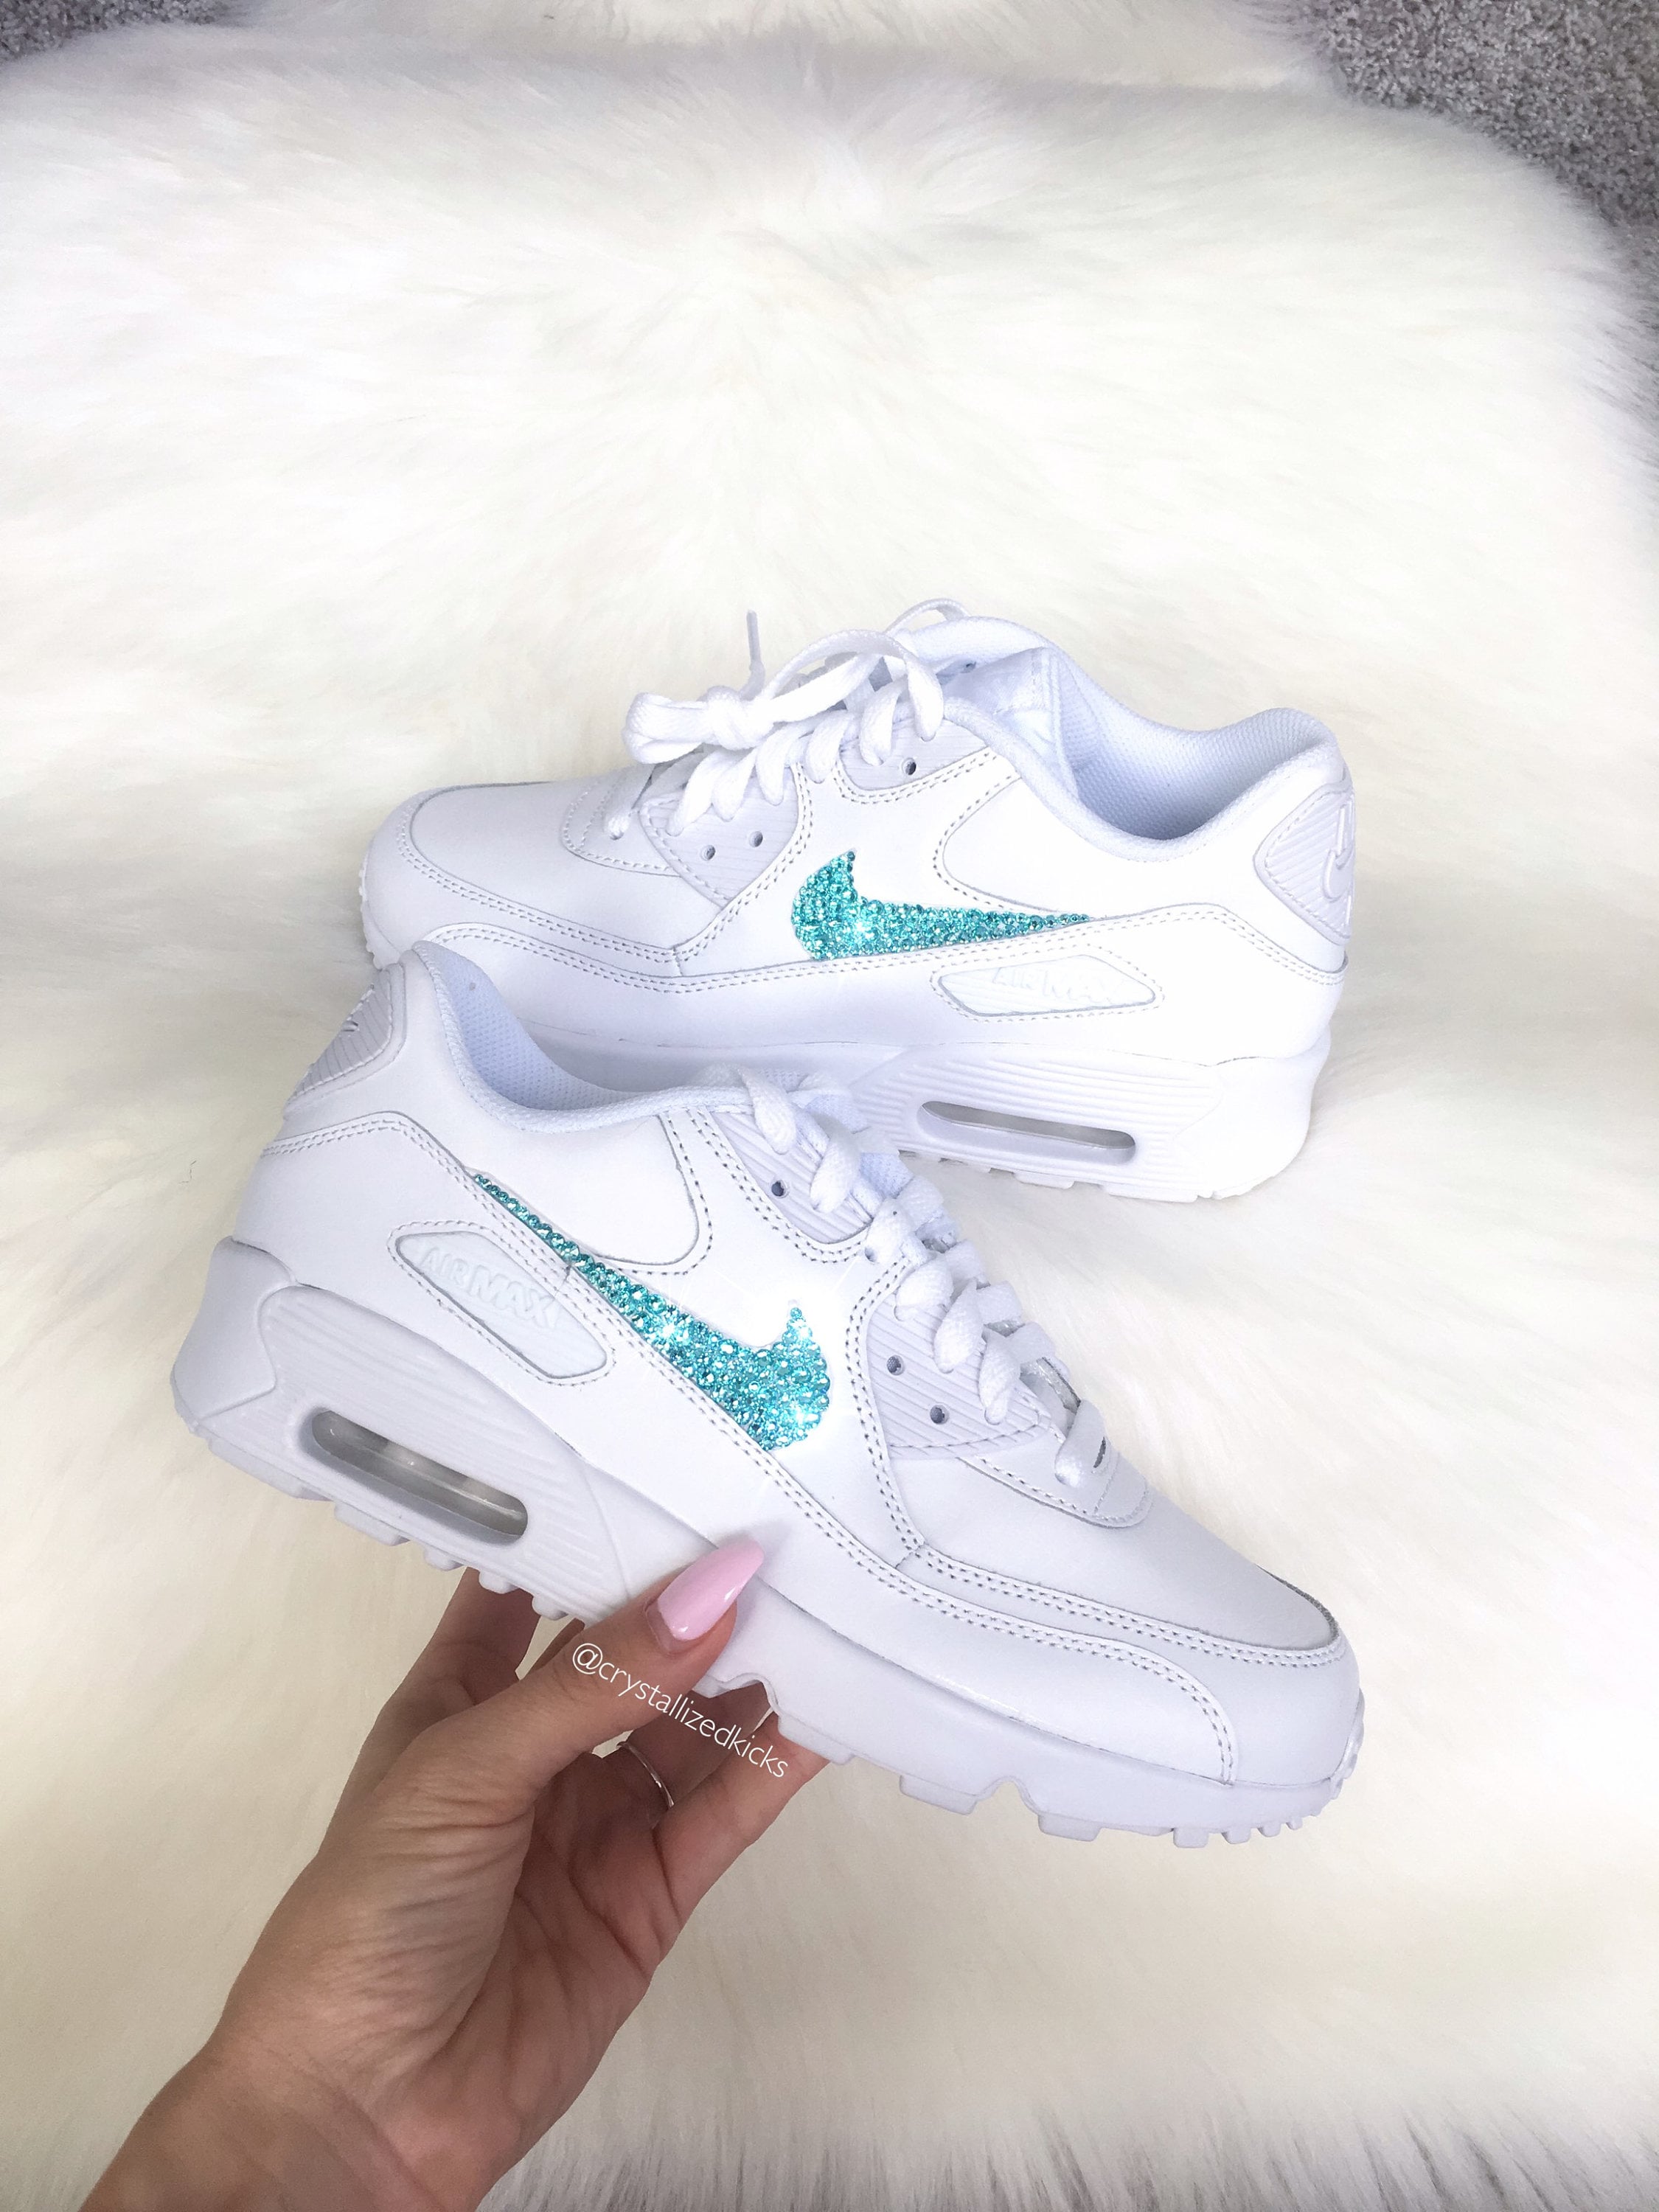 nike air max thea premium in pure light white with swarovski crystals details